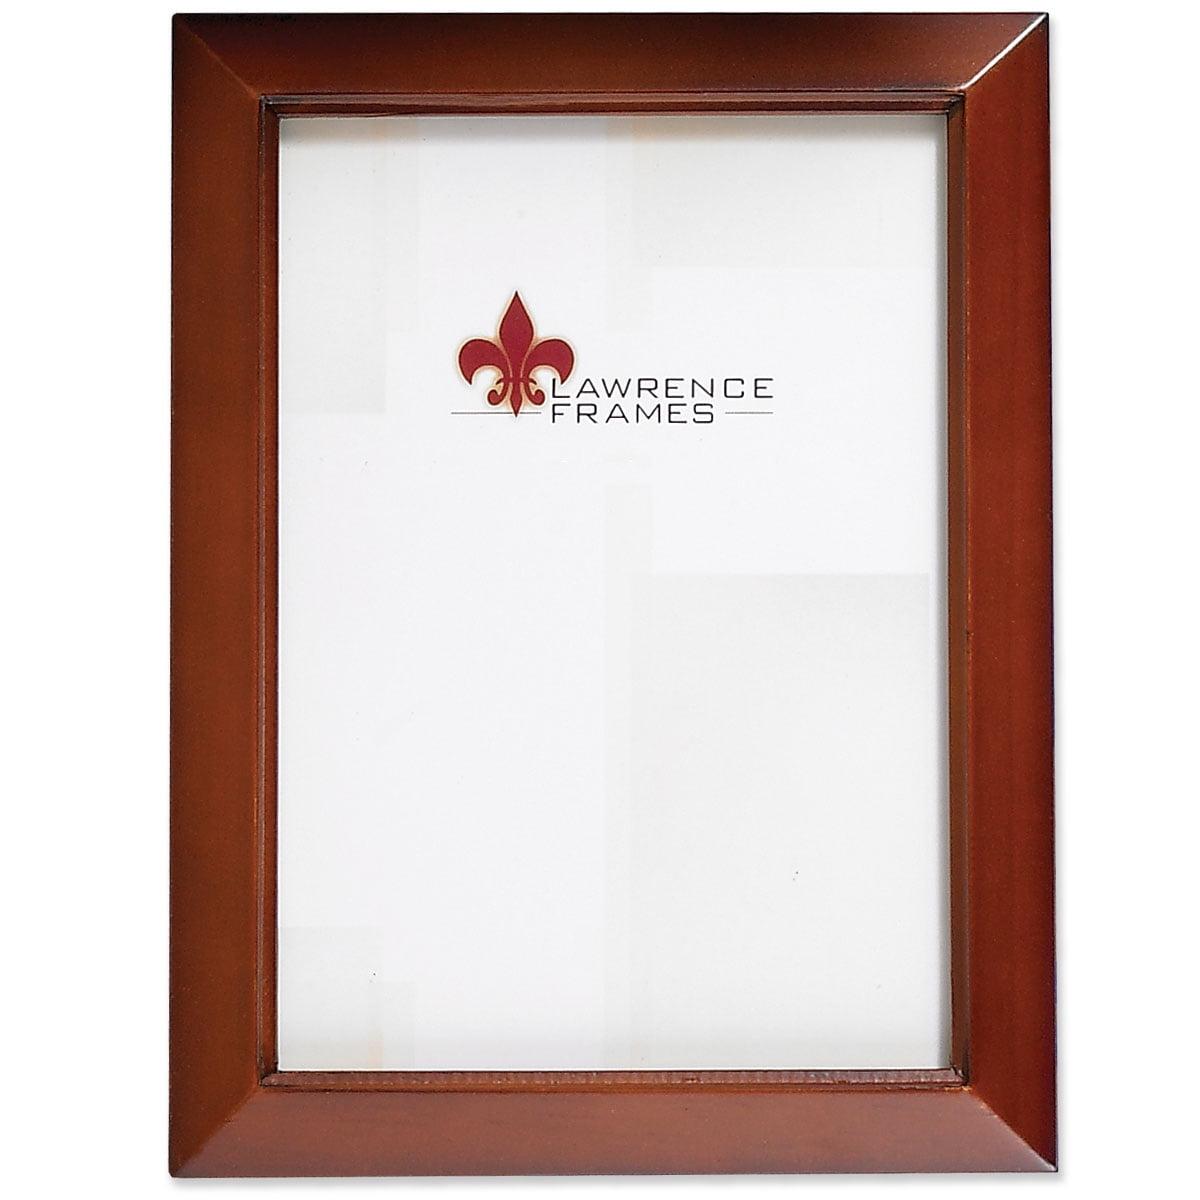 Classic Chestnut Wood 5x7 Frame for Tabletop or Wall Display